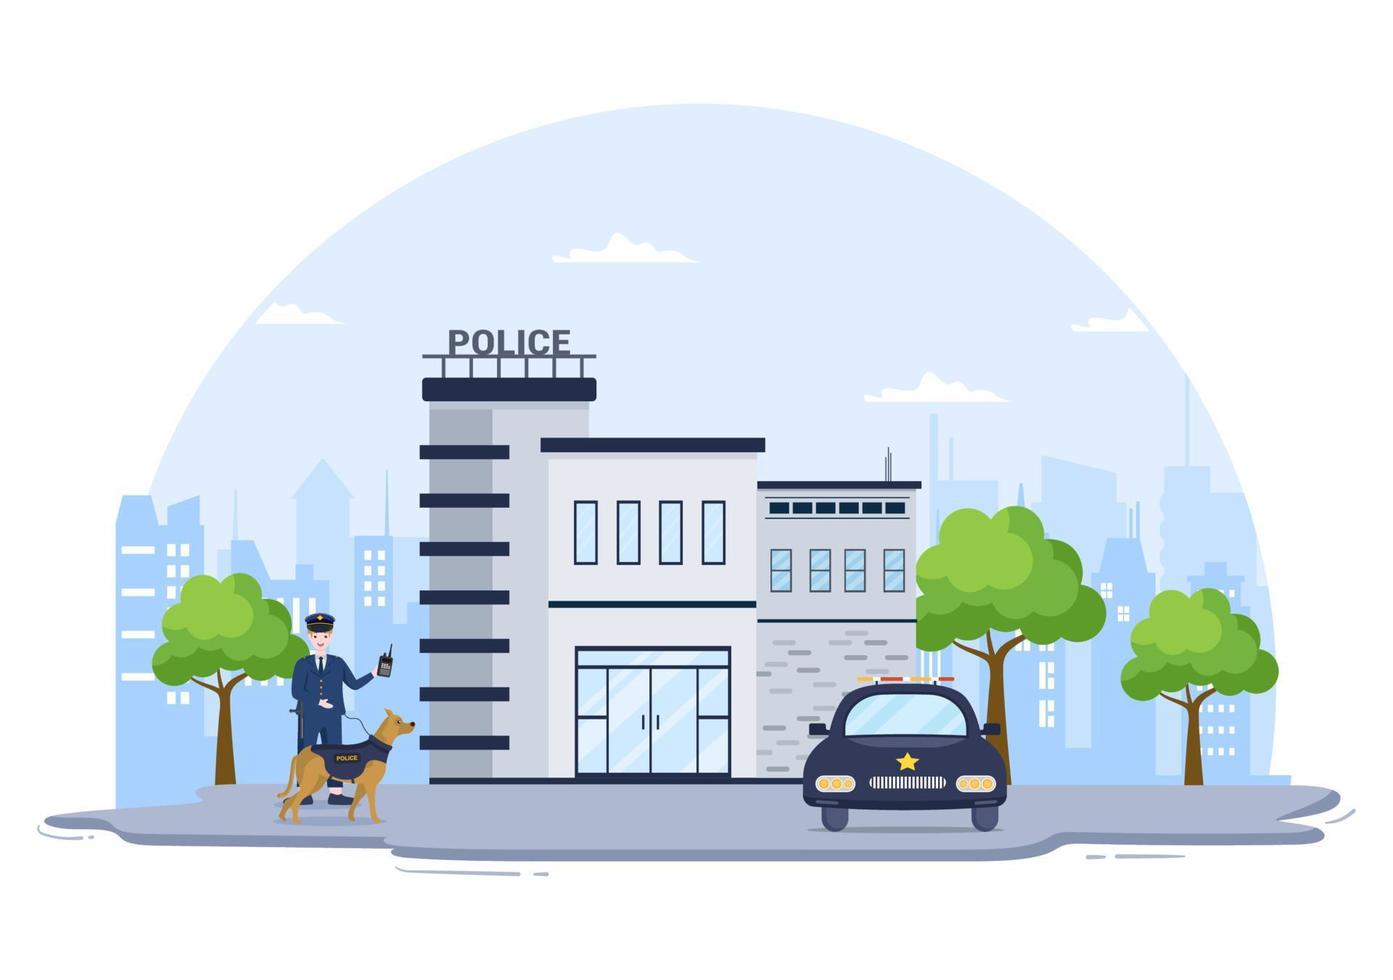 Police Station Department Building with Policeman and Police Car in Flat Style Background Illustration vector